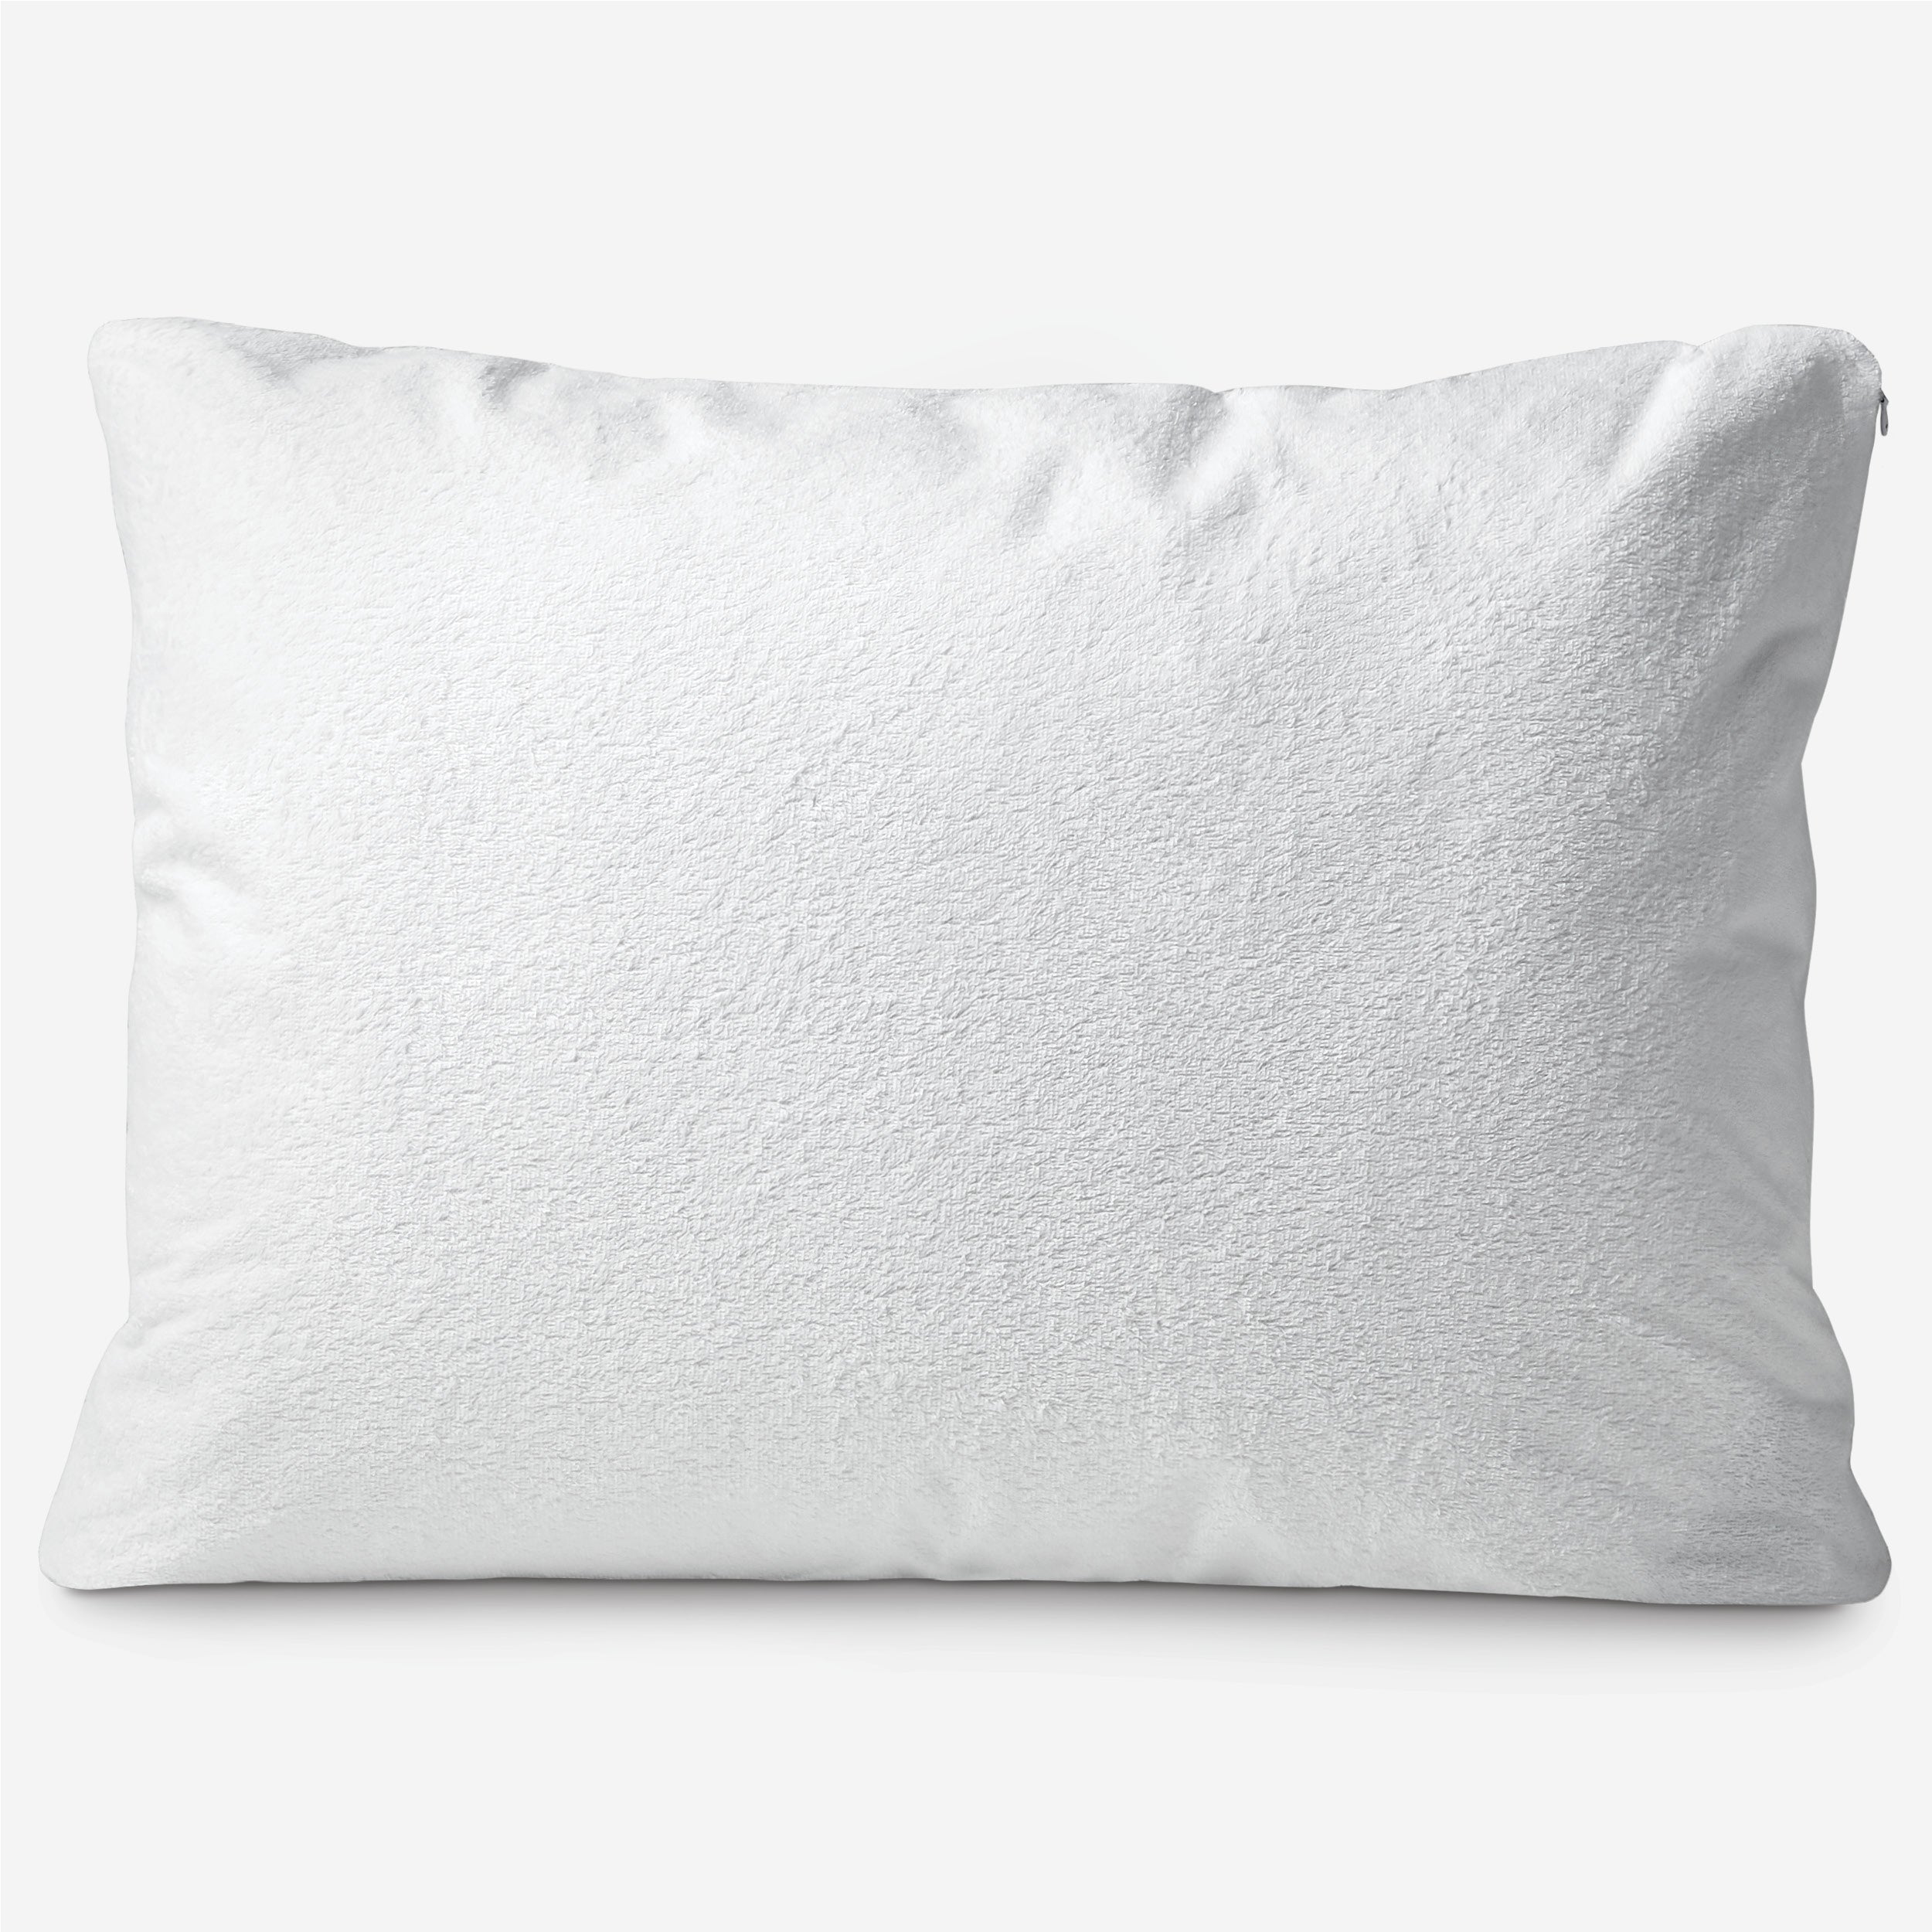 TR_PillowProtector_White_CategoryImage.jpg